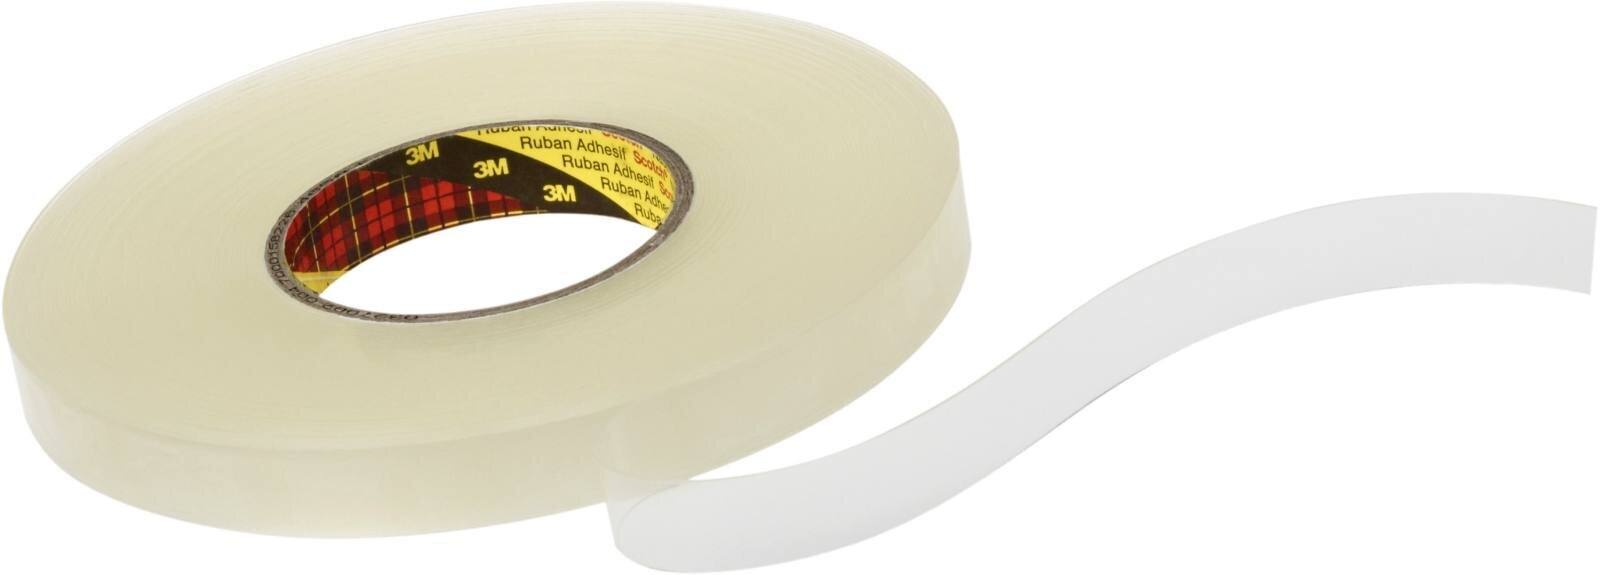 3M Double-sided removable adhesive tape 4658F, transparent, 12 mm x 25 m, 0.8 mm